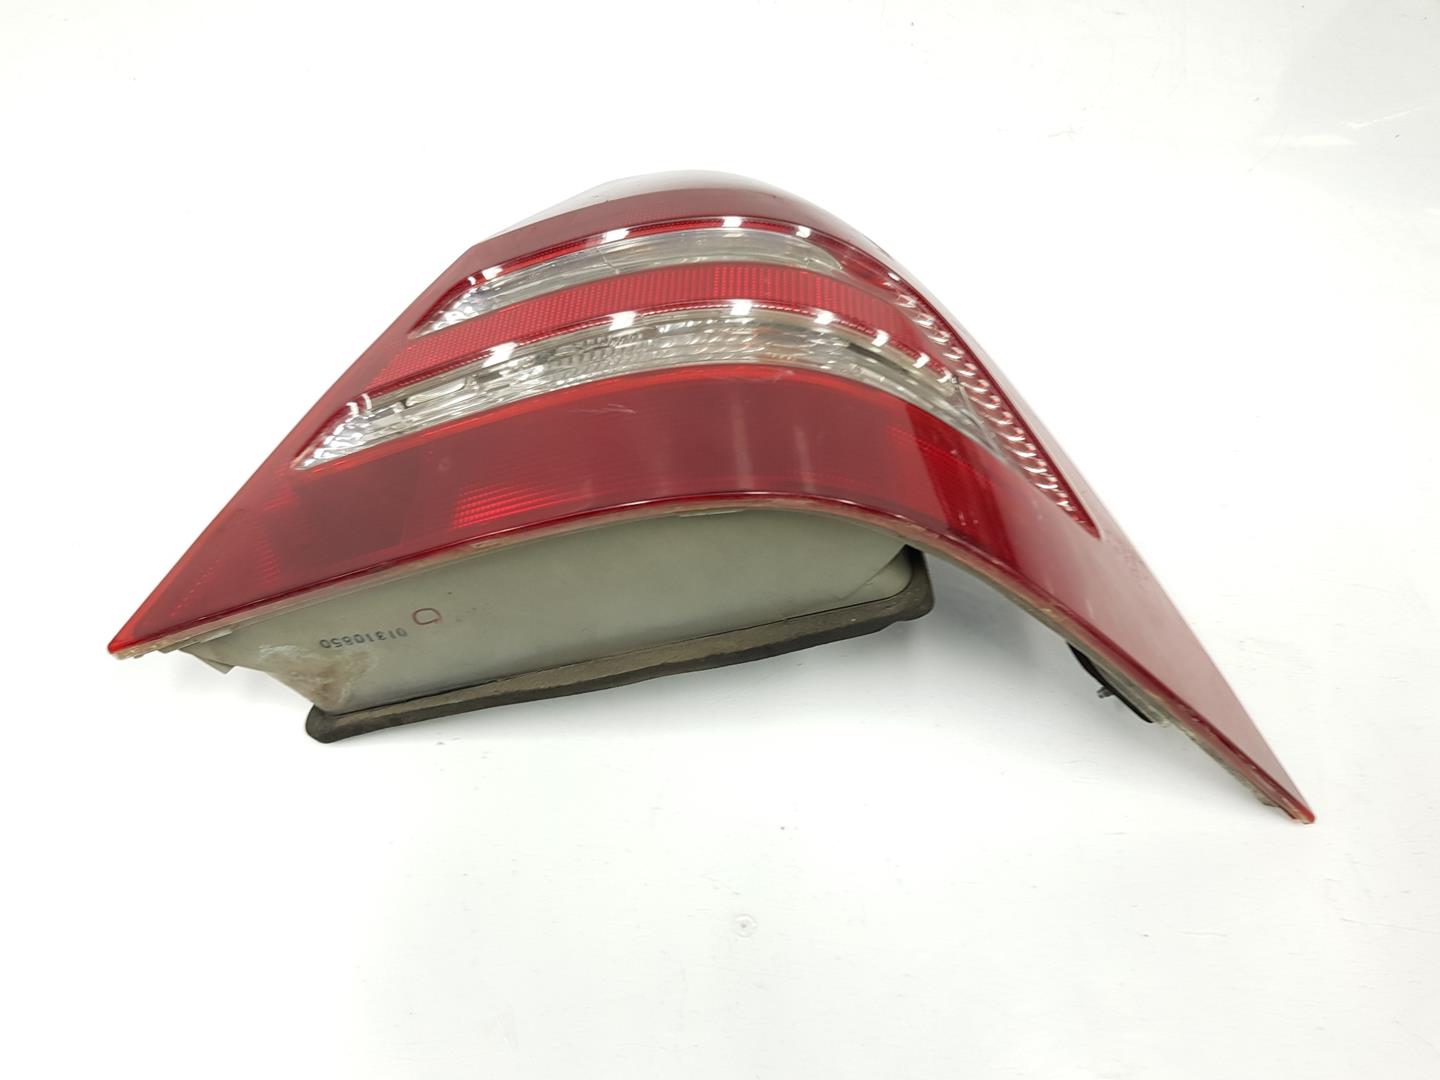 MERCEDES-BENZ C-Class W203/S203/CL203 (2000-2008) Rear Right Taillight Lamp 4401917R, DEPO084401917R 23079869